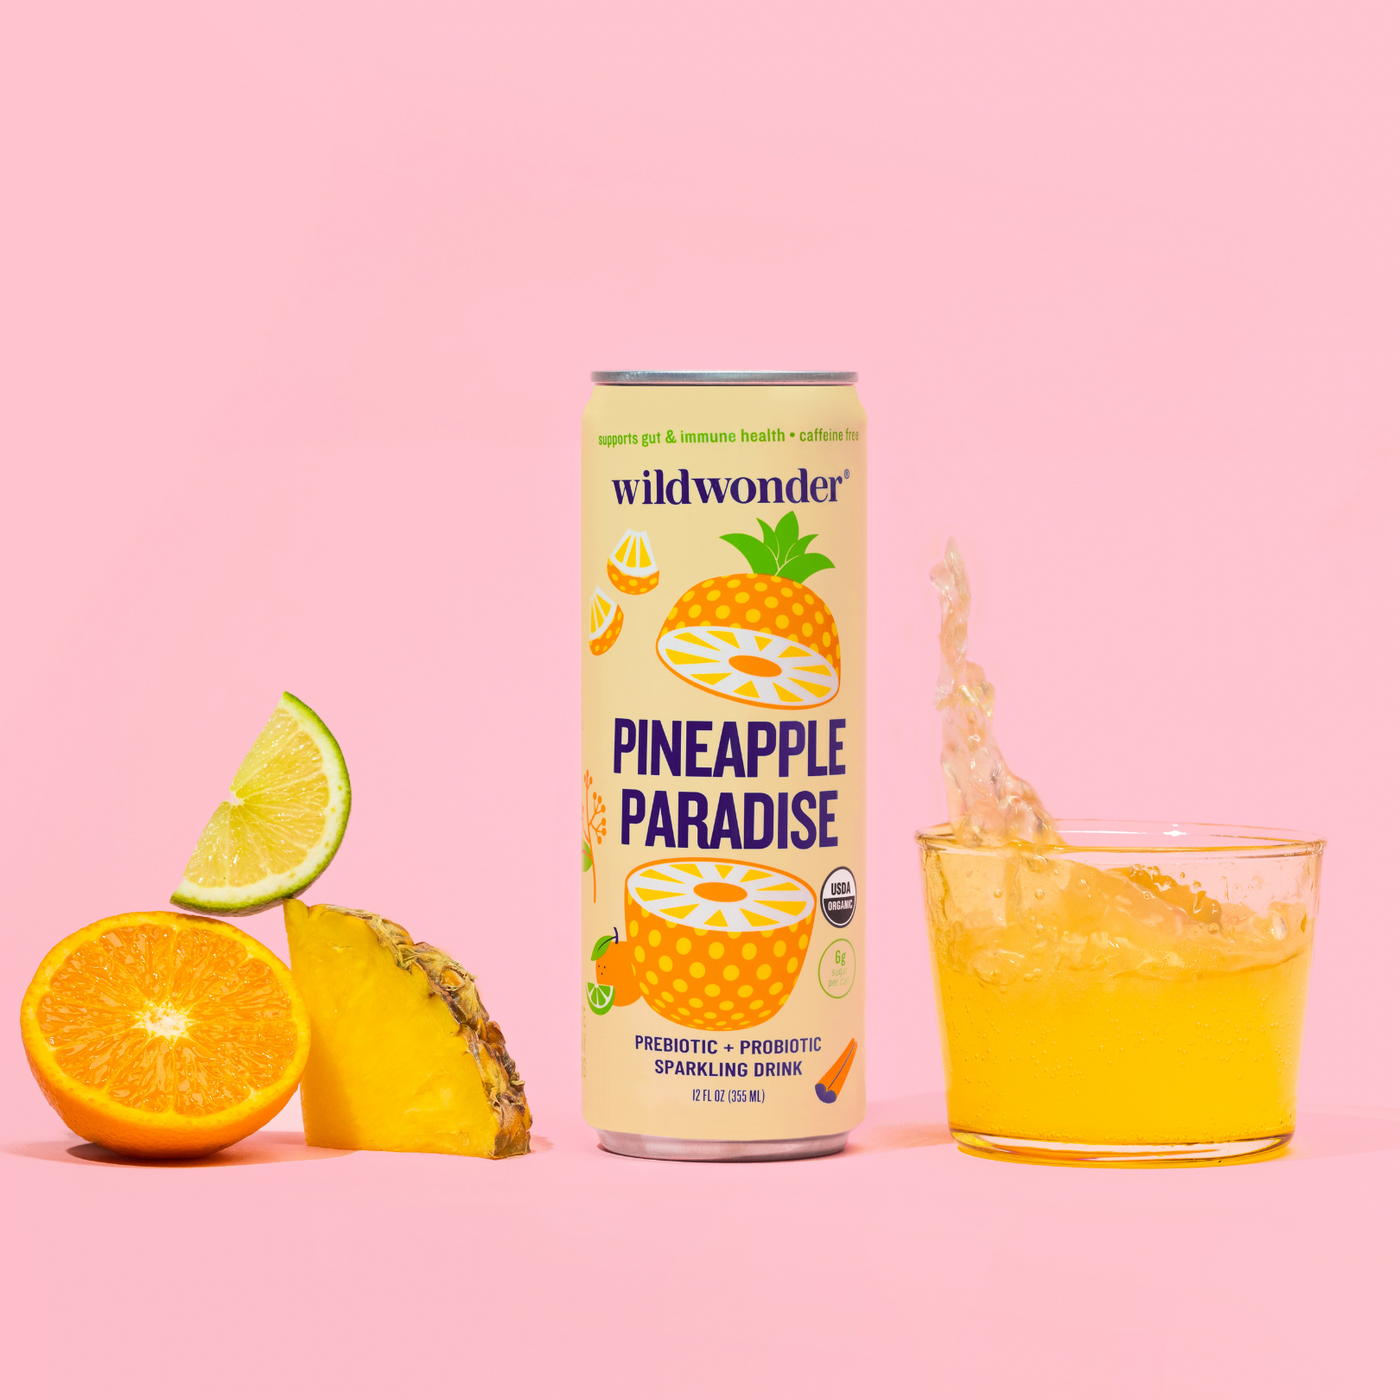 A can of wildwonder's Pineapple Paradise. A glass of the drink is to the right, while cut fruit pieces of lime, tangerine and pineapple are to the left.